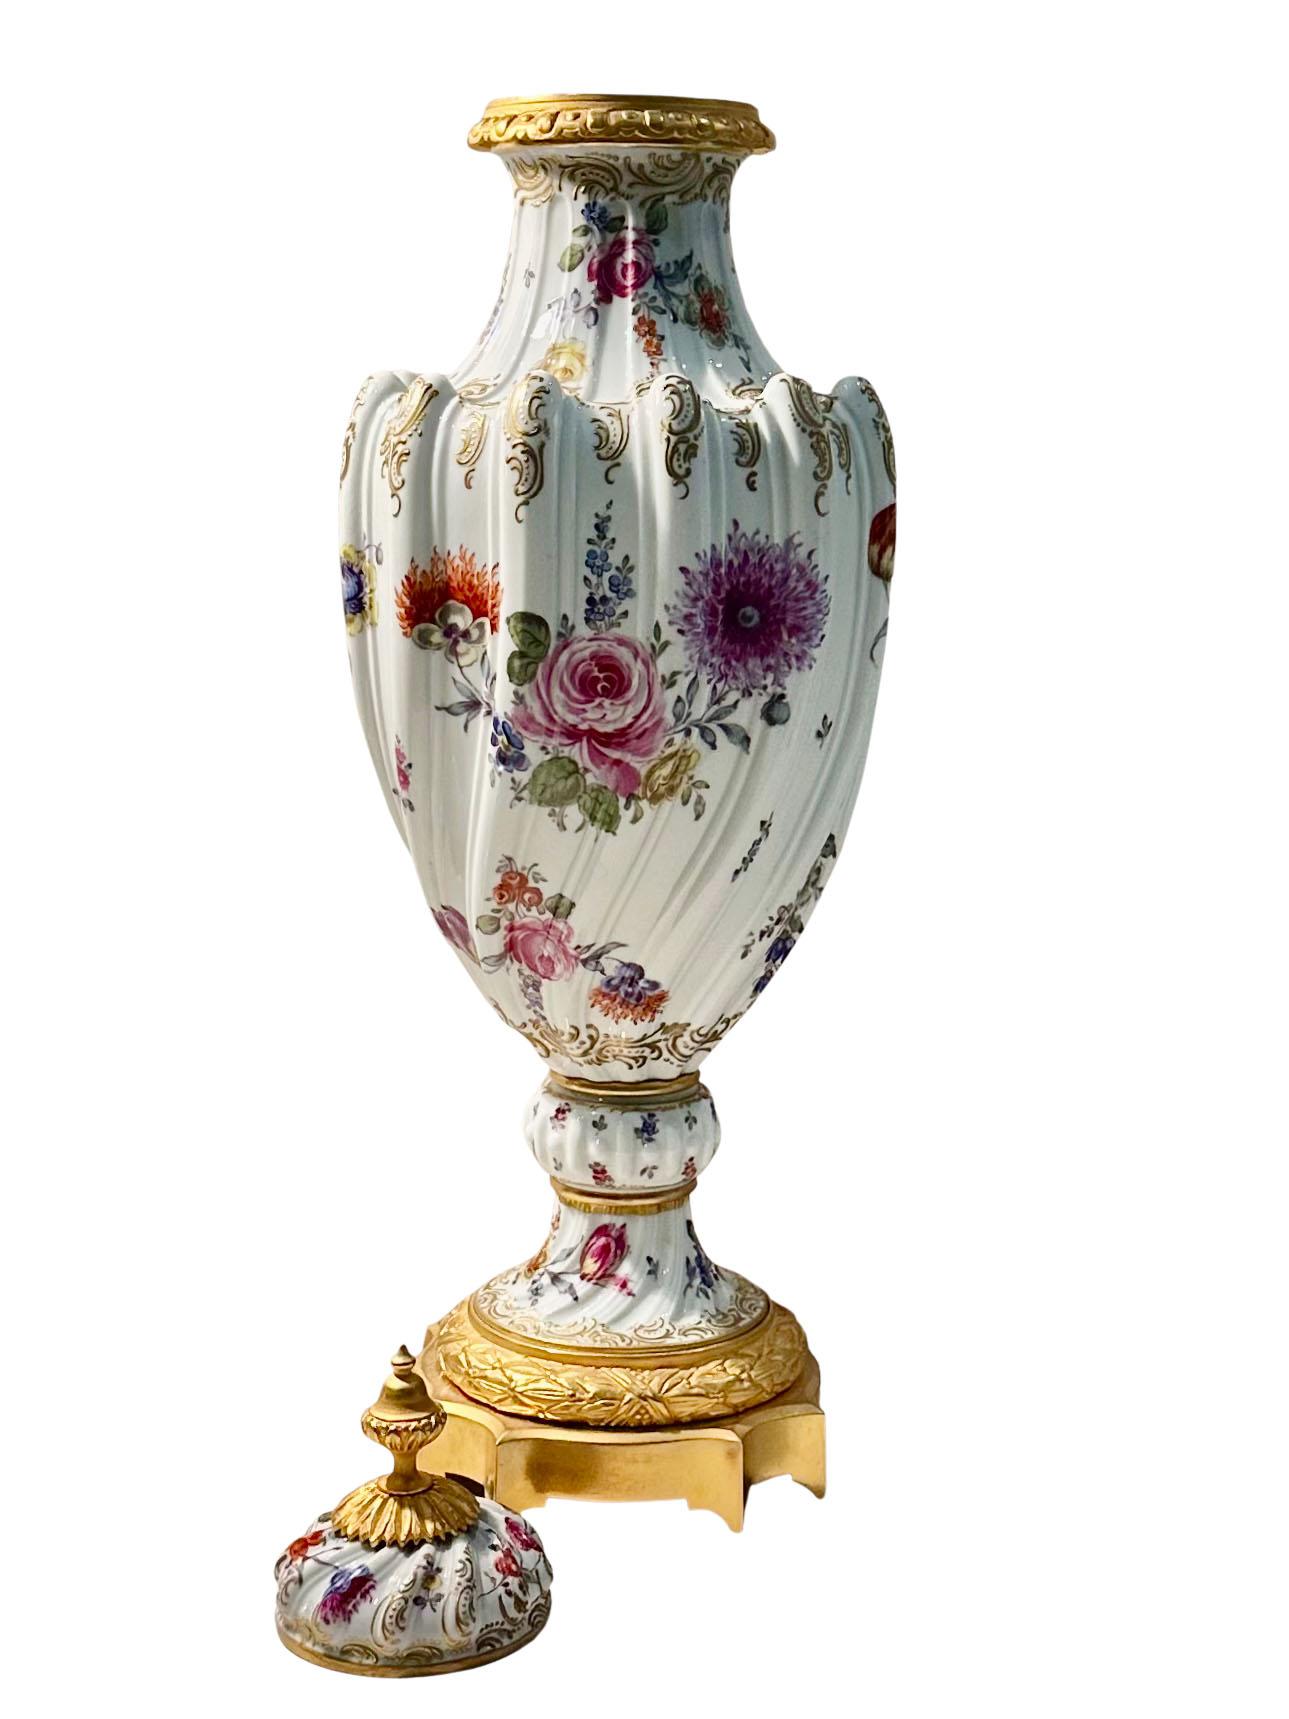 A single Sevres porcelain garniture decorated with hand painted flowers. Fitted with bronze ormolu which has been restored. It is beautifully painted and decorated and is in amazing condition. Does have a lid that comes off but the vase is not meant